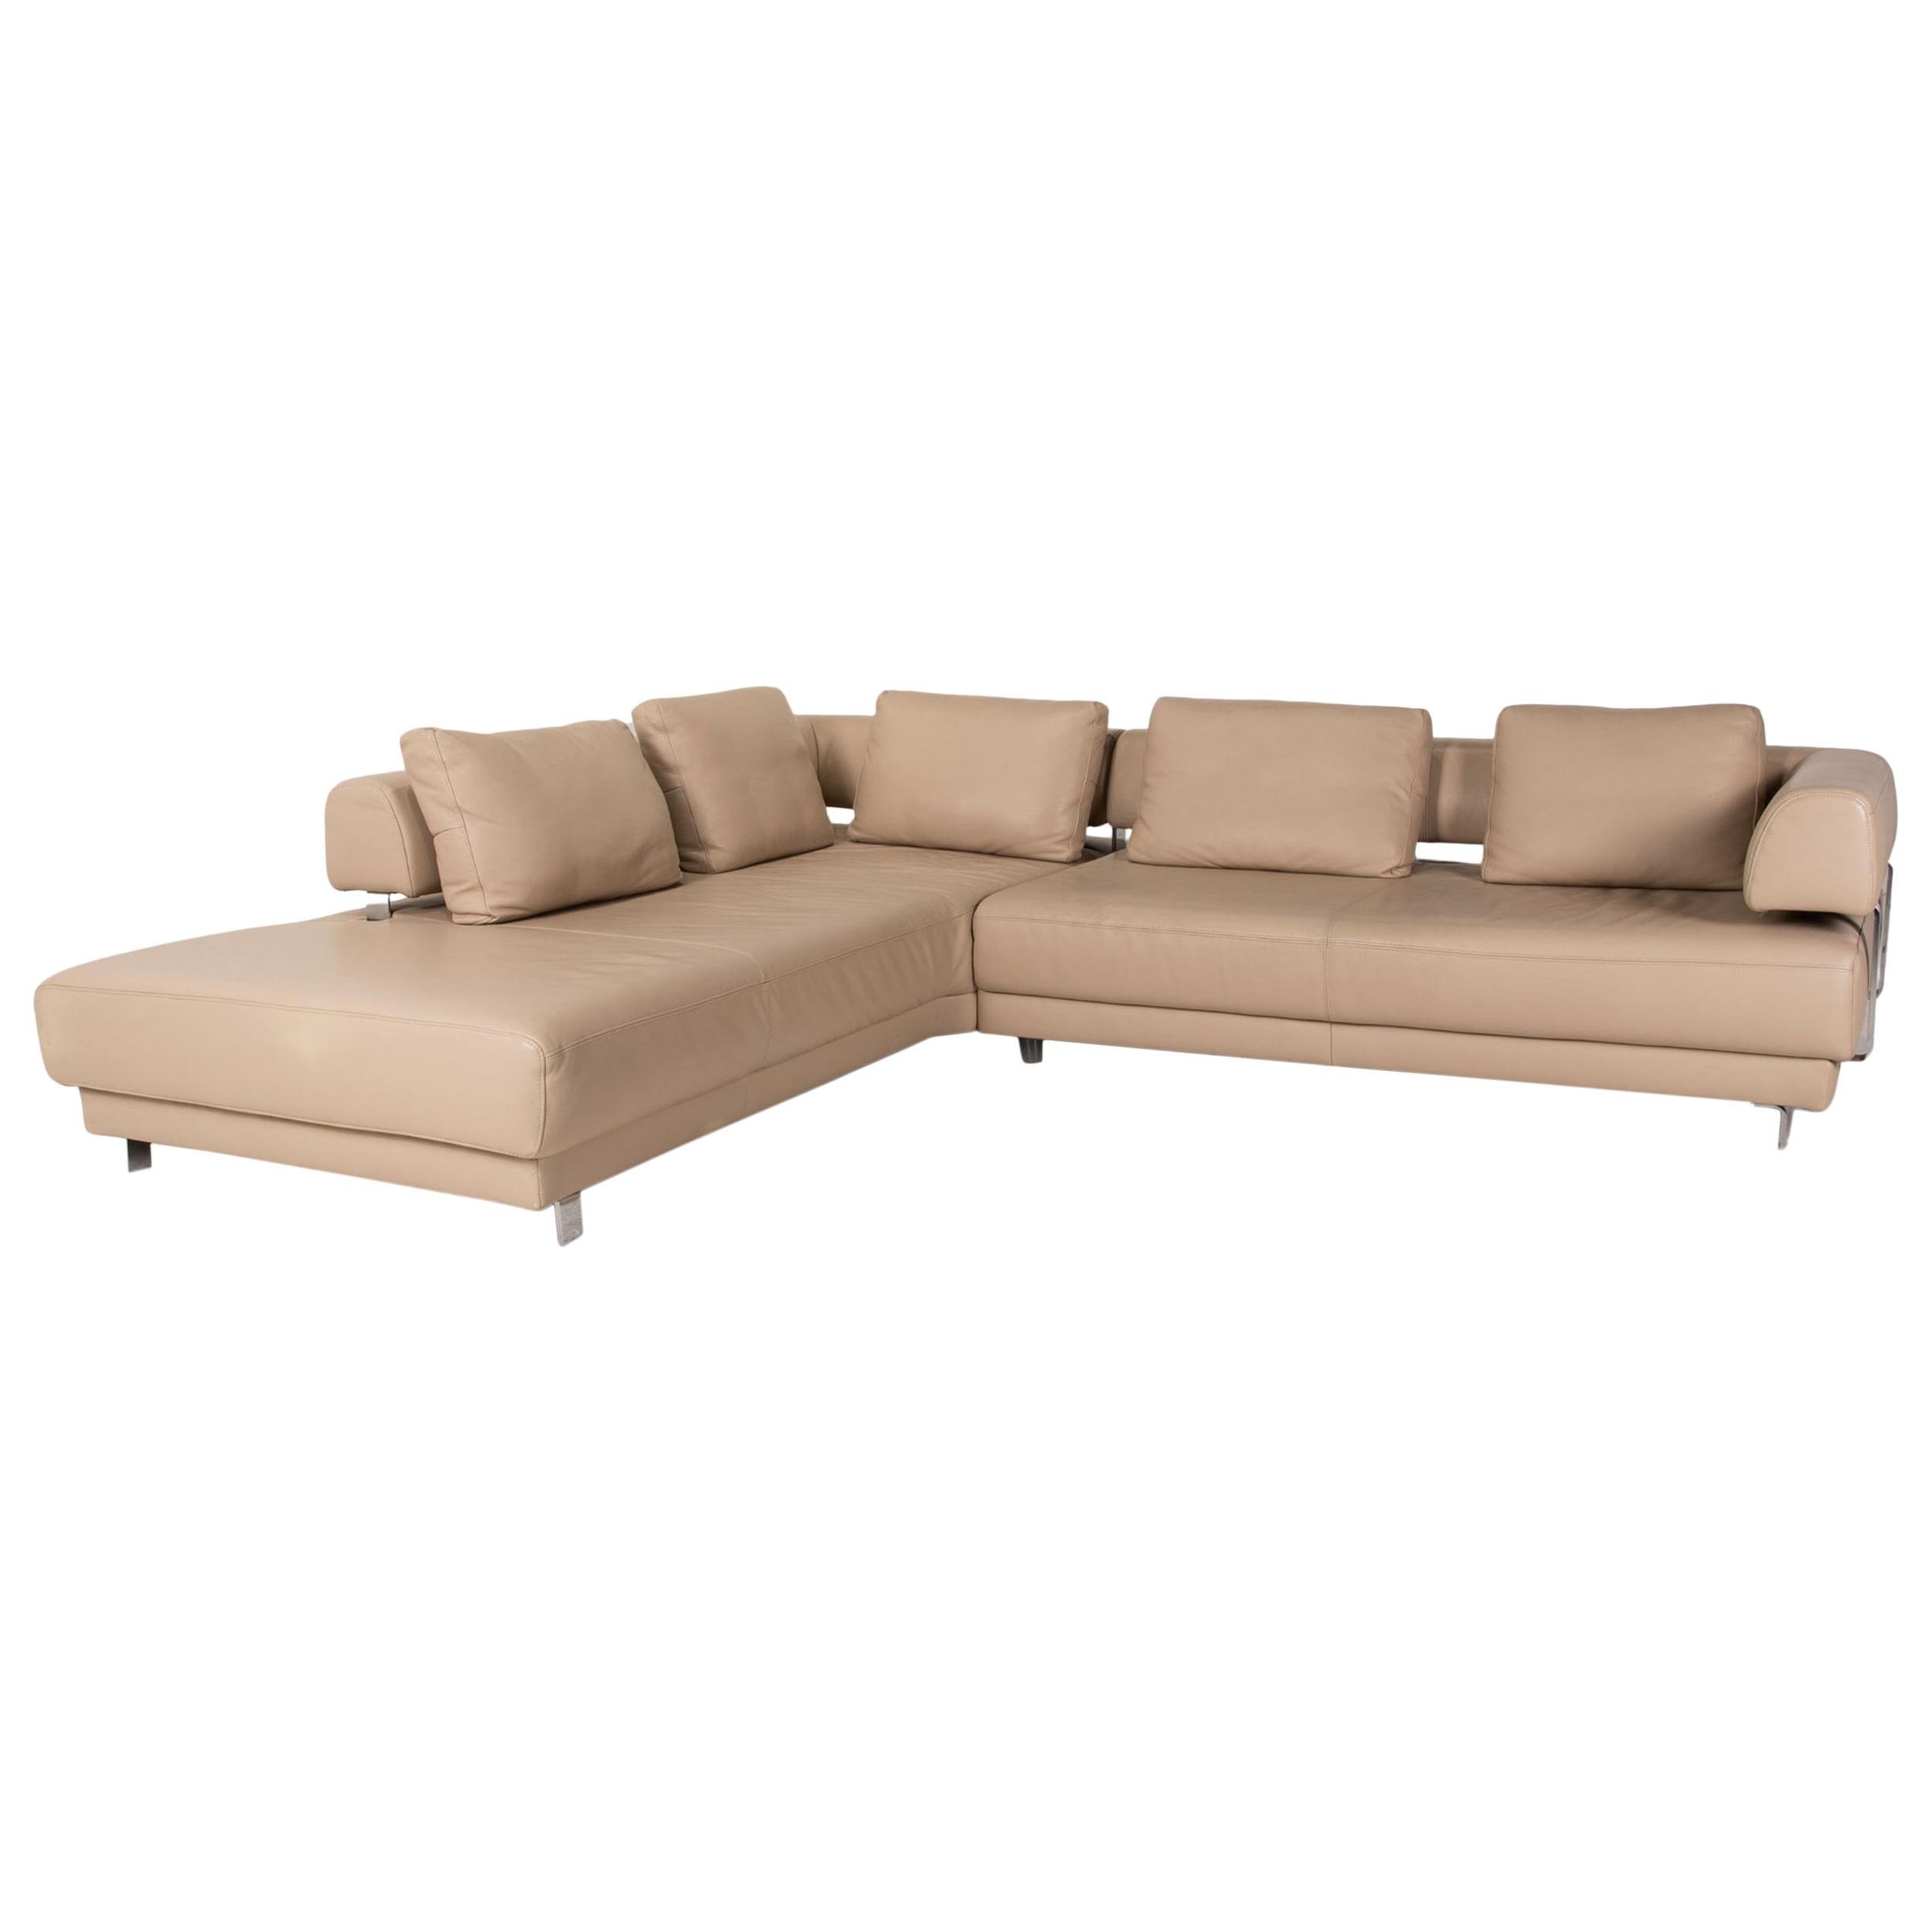 Ewald Schillig Brand Face Leather Sofa Beige Corner Sofa Couch For Sale